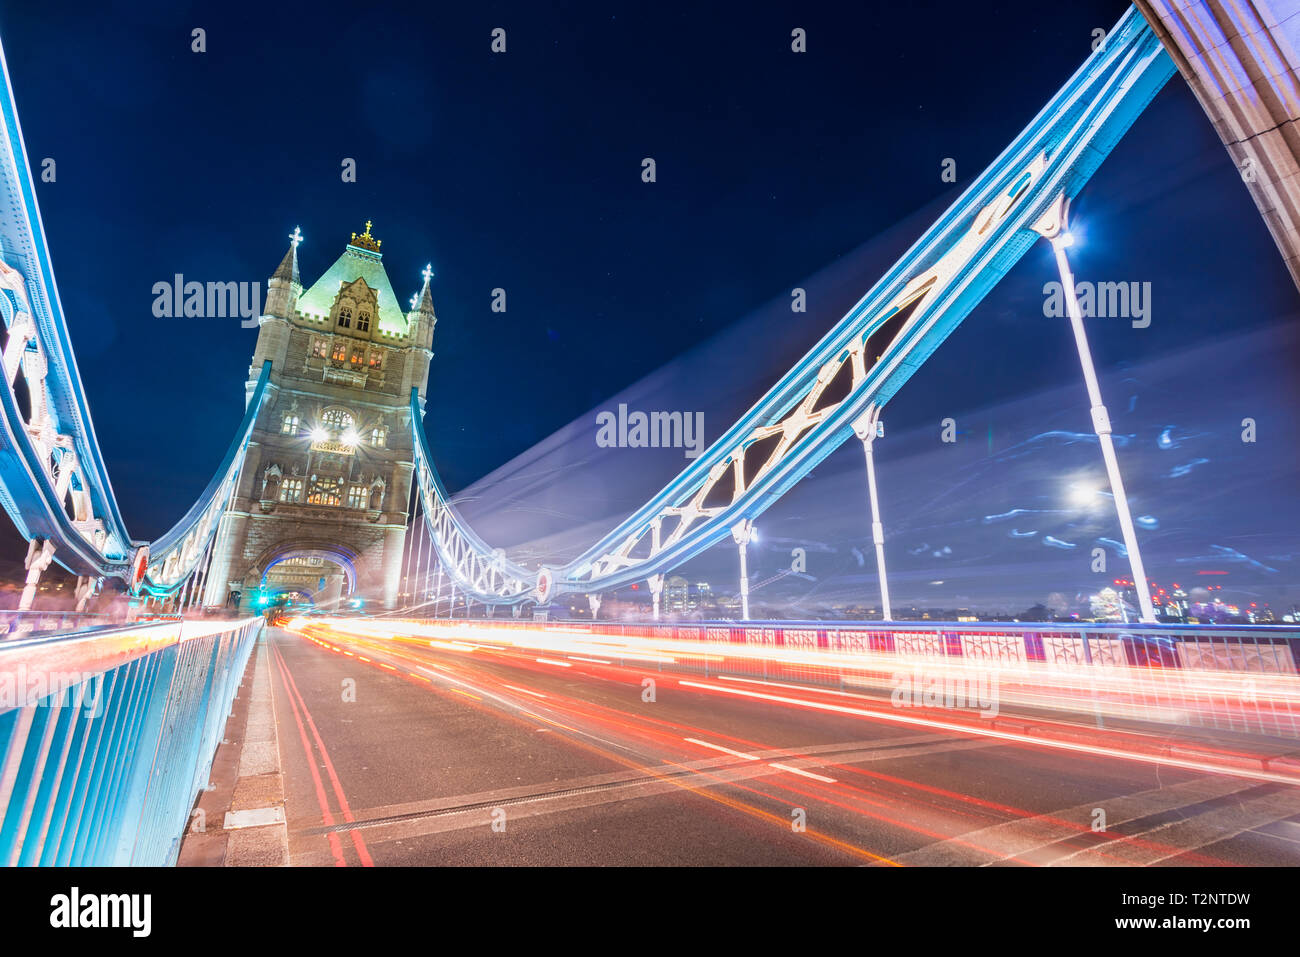 Long exposure of Tower bridge at night with light stripes from traffic, City of London, UK Stock Photo